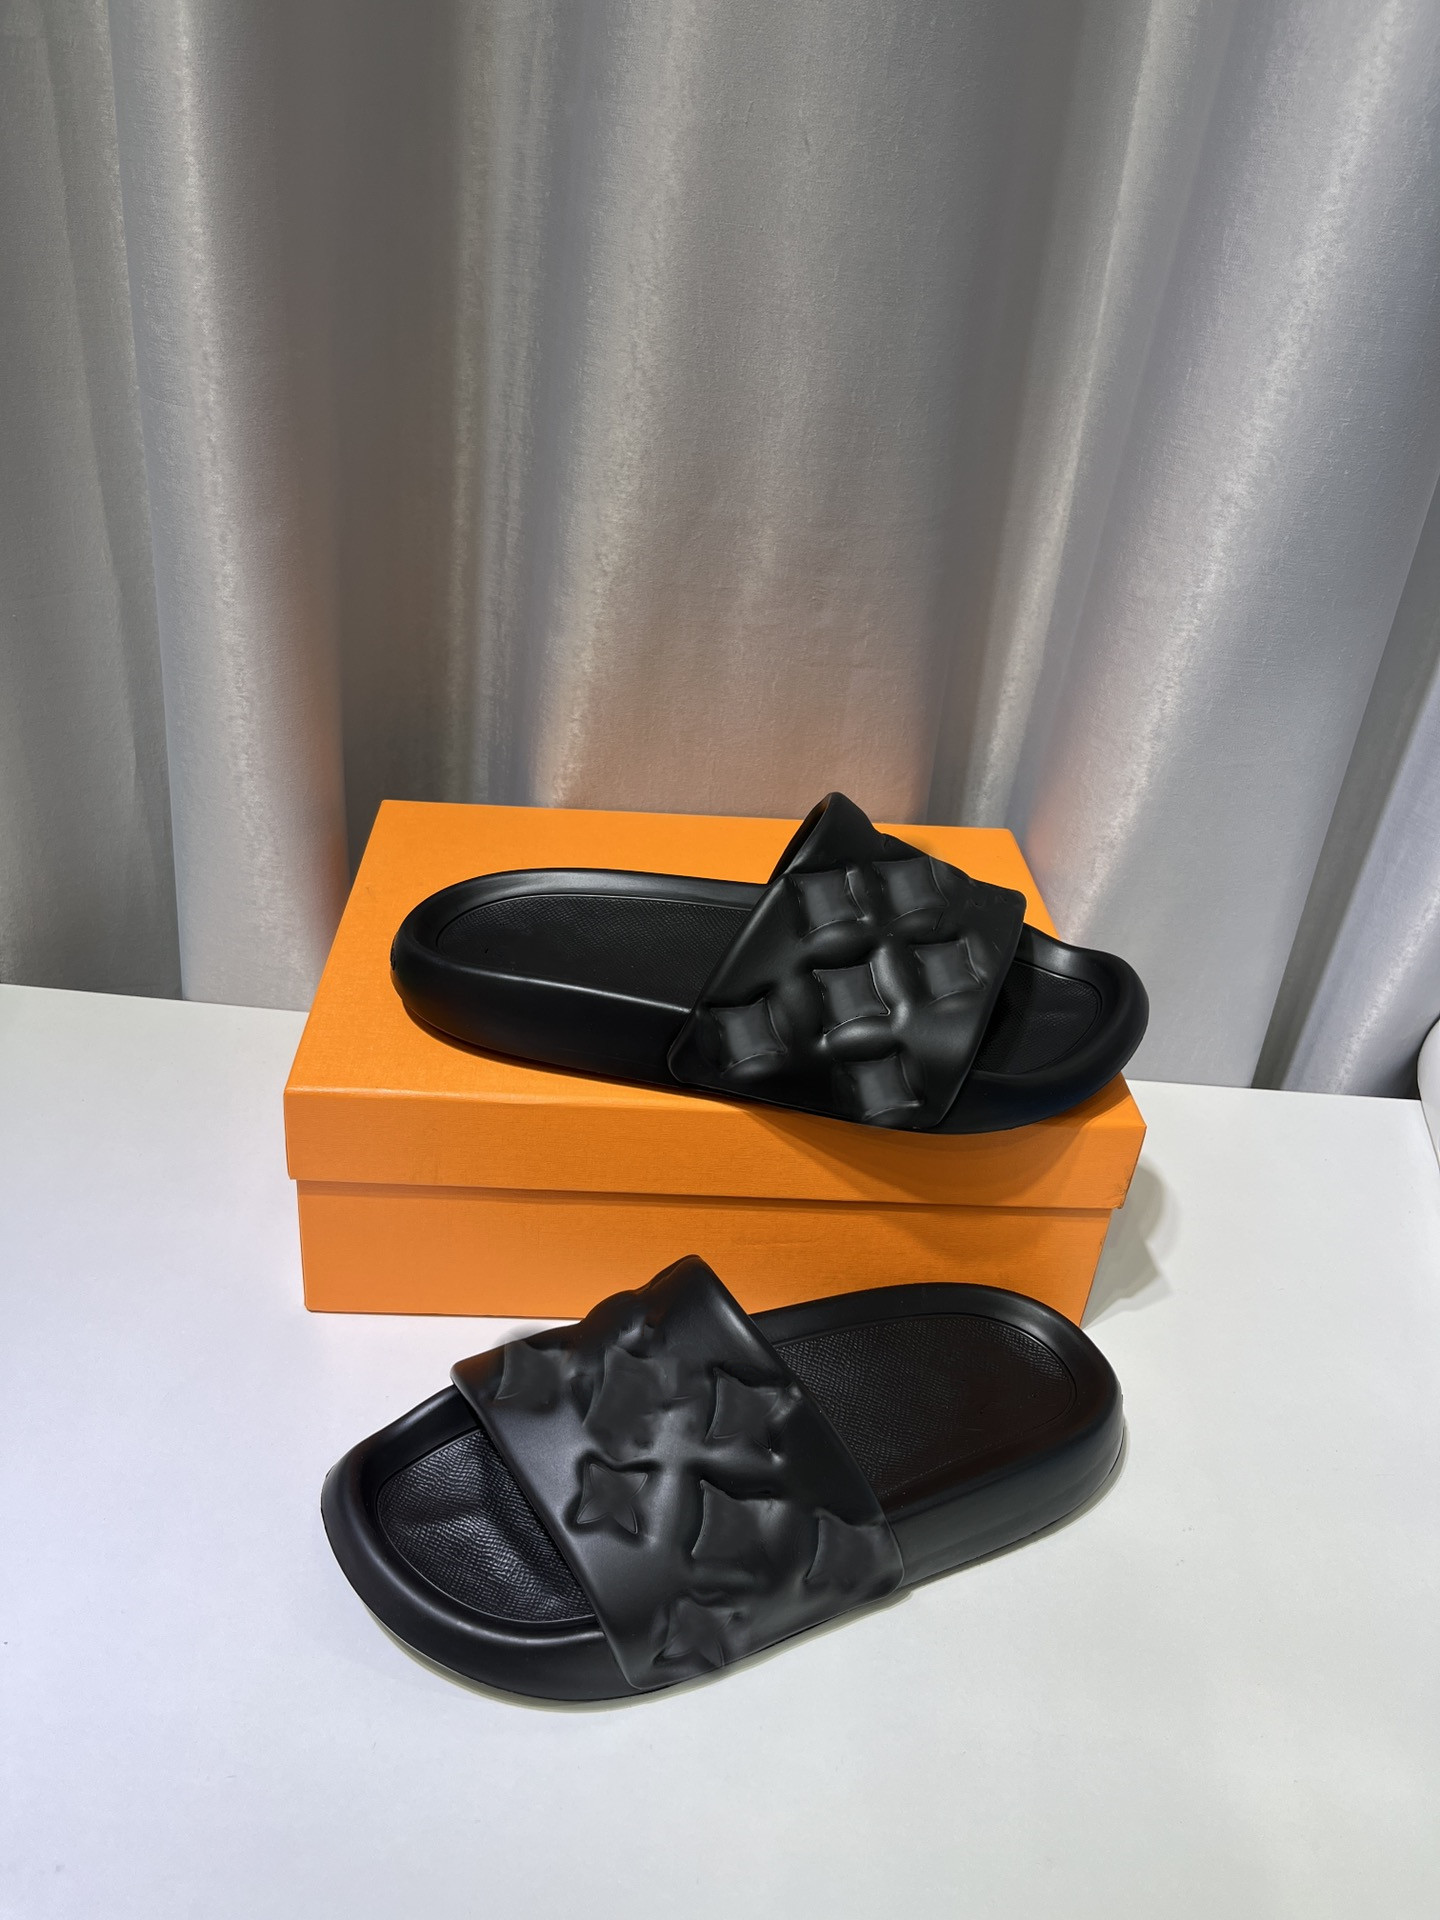 

Designer Womans Slippers Luxury mans Slide beach Wholesale Price leather rubber sandal pool Shoes high quality Marshmallow with Original Box dustbag size 35-45, 20